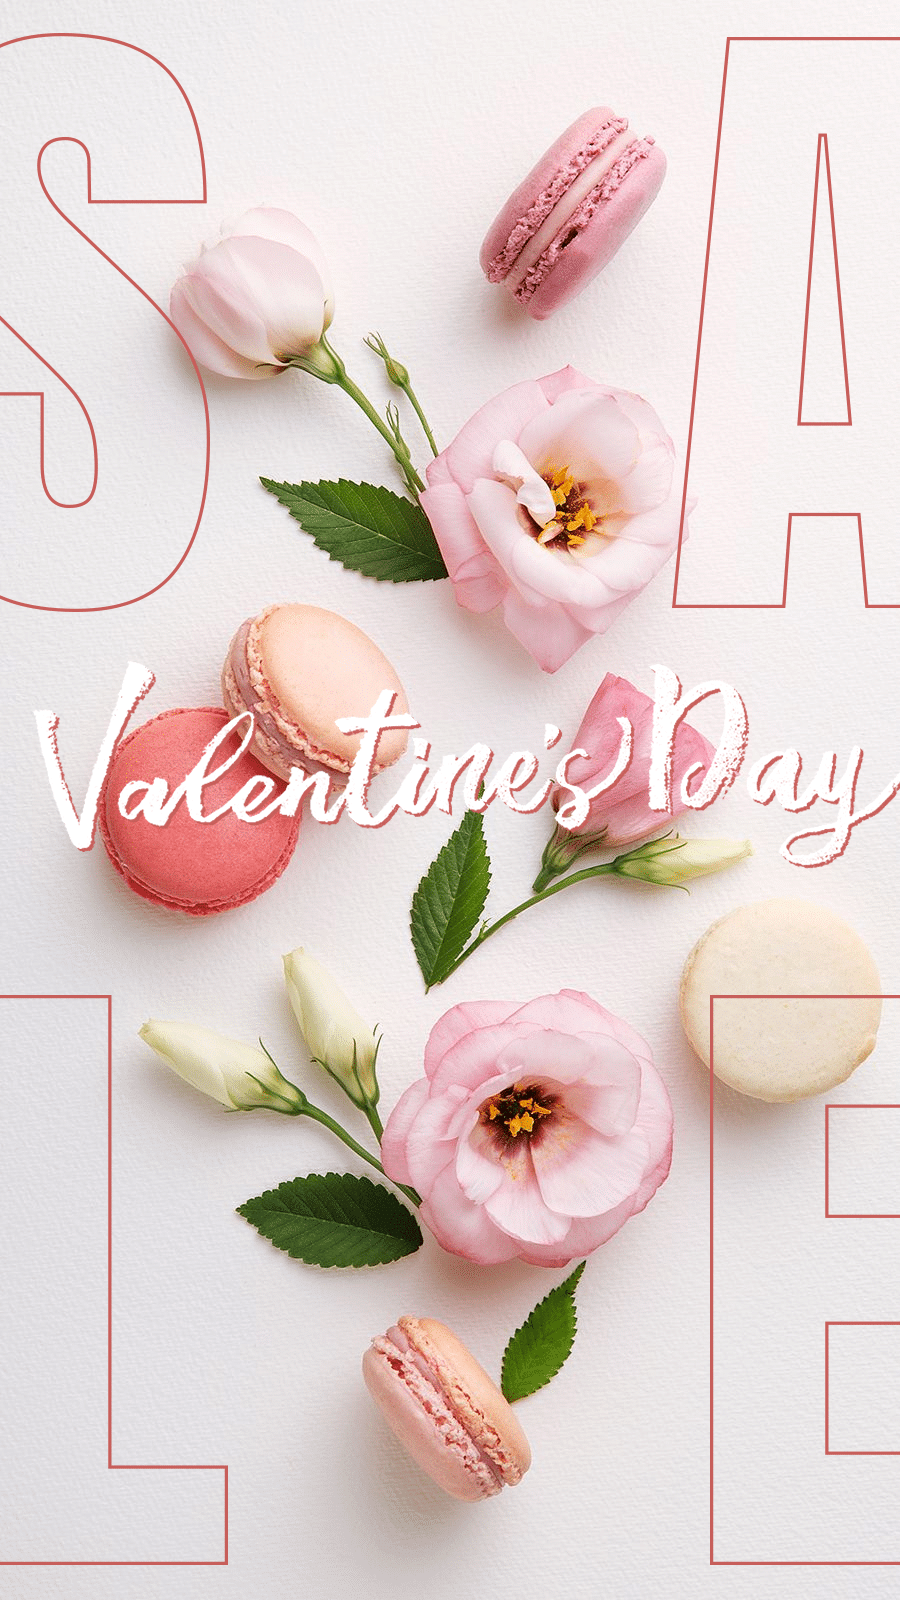 Valentine's Day Pink Theme Macaroon and Flowers Sale Ecommerce Story预览效果